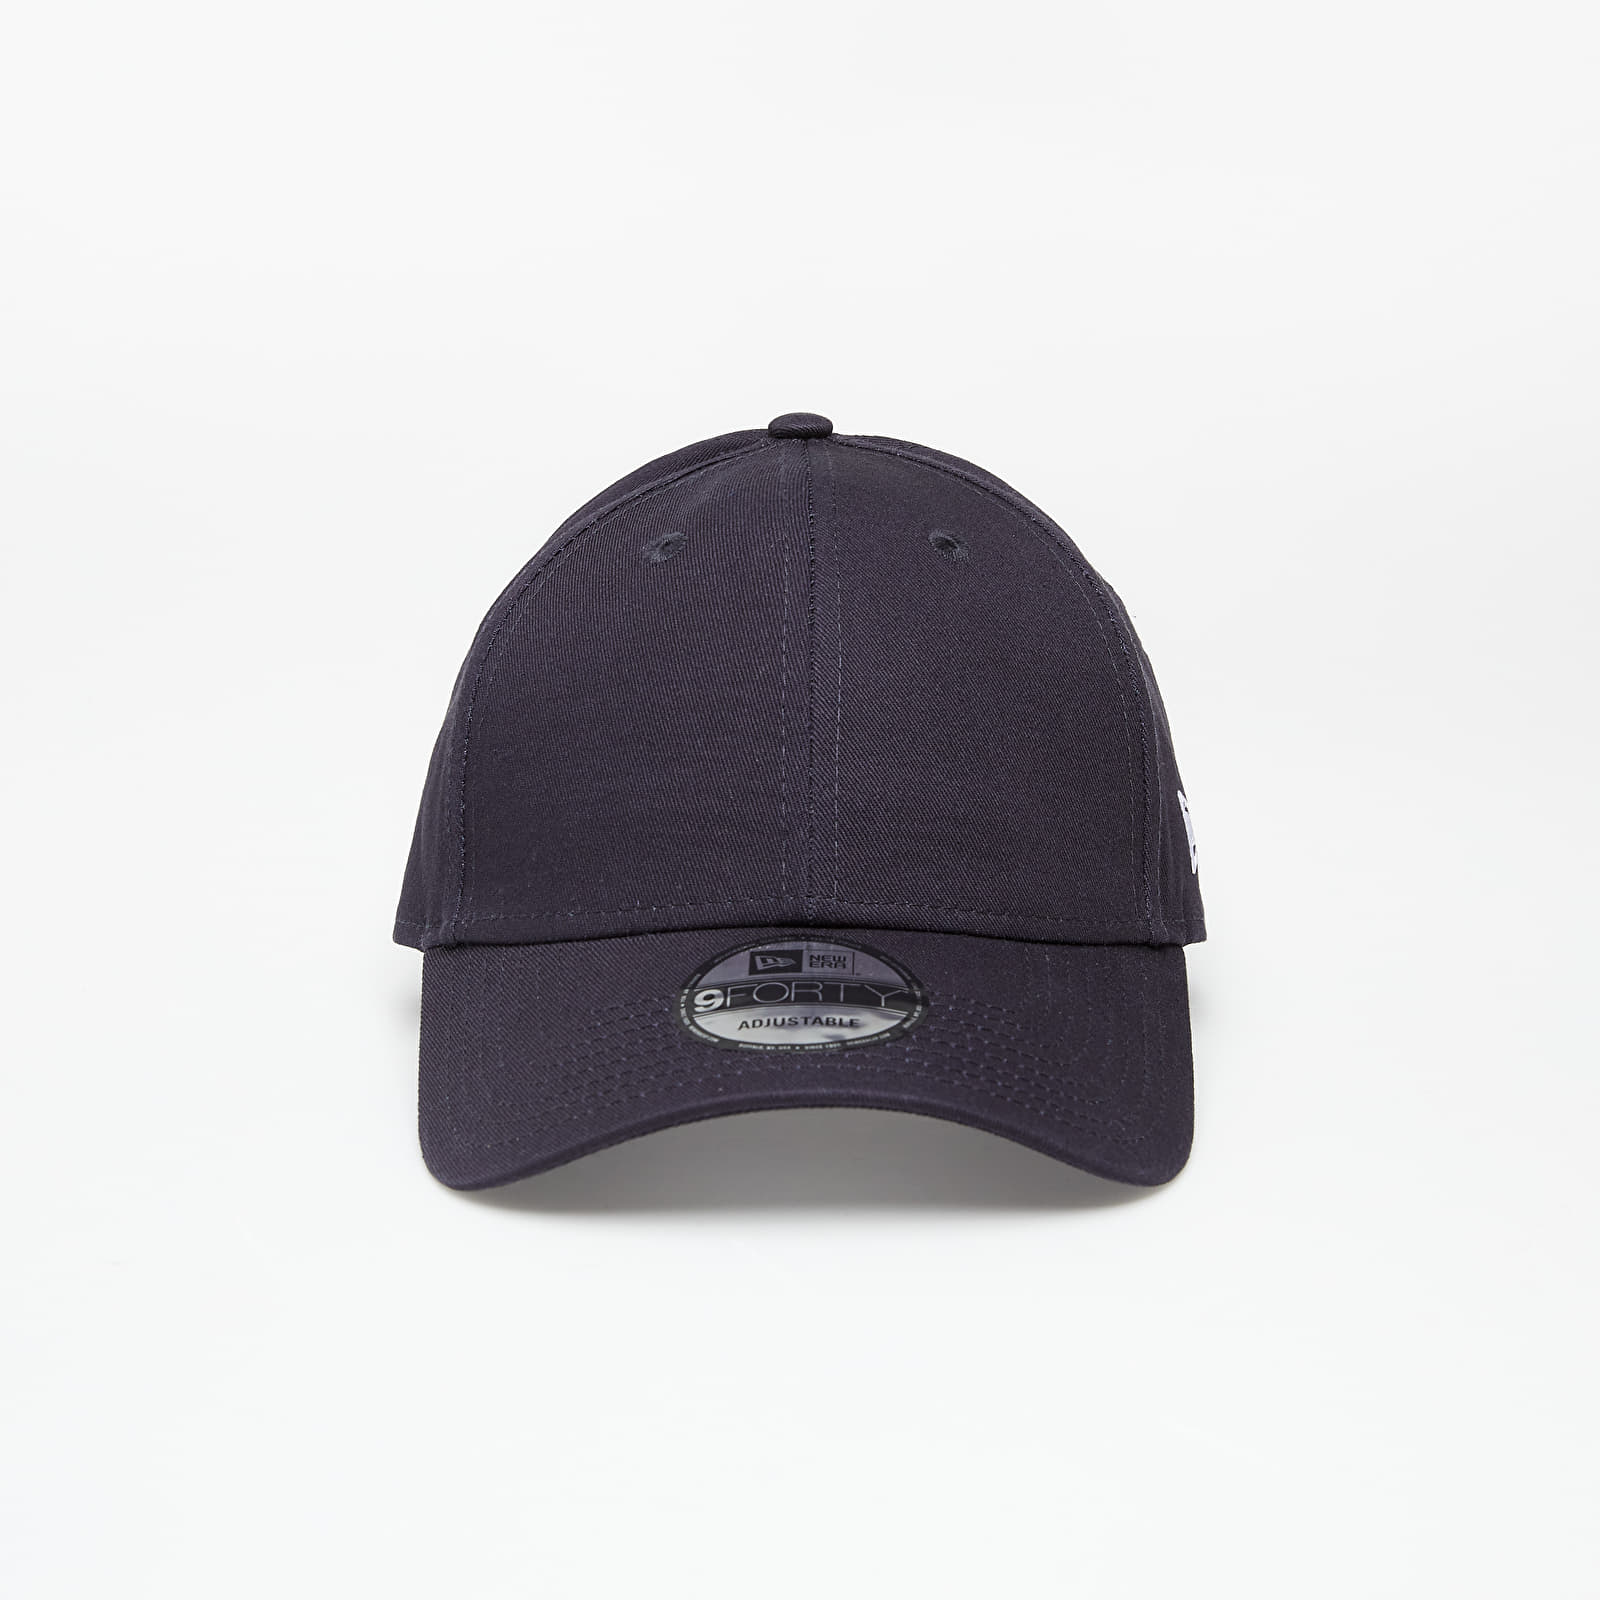 Șepci New Era Cap 9Forty Flag Collection Navy/ White